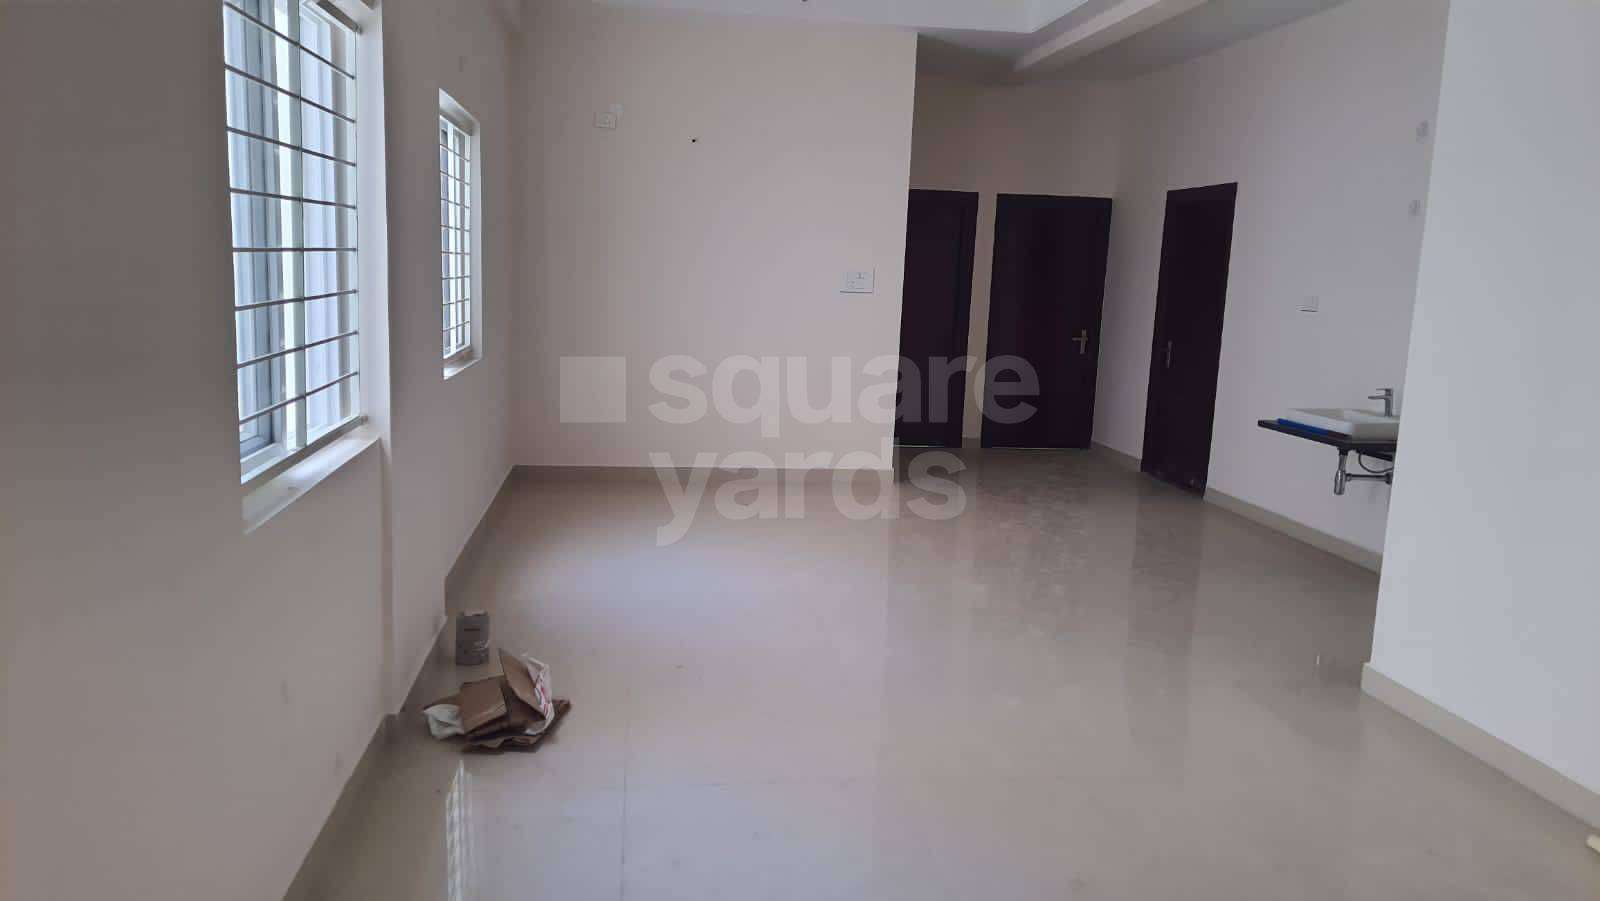 Resale 3 Bedroom 1755 Sq.Ft. Apartment in SMR Vinay Iconia Hyderabad ...